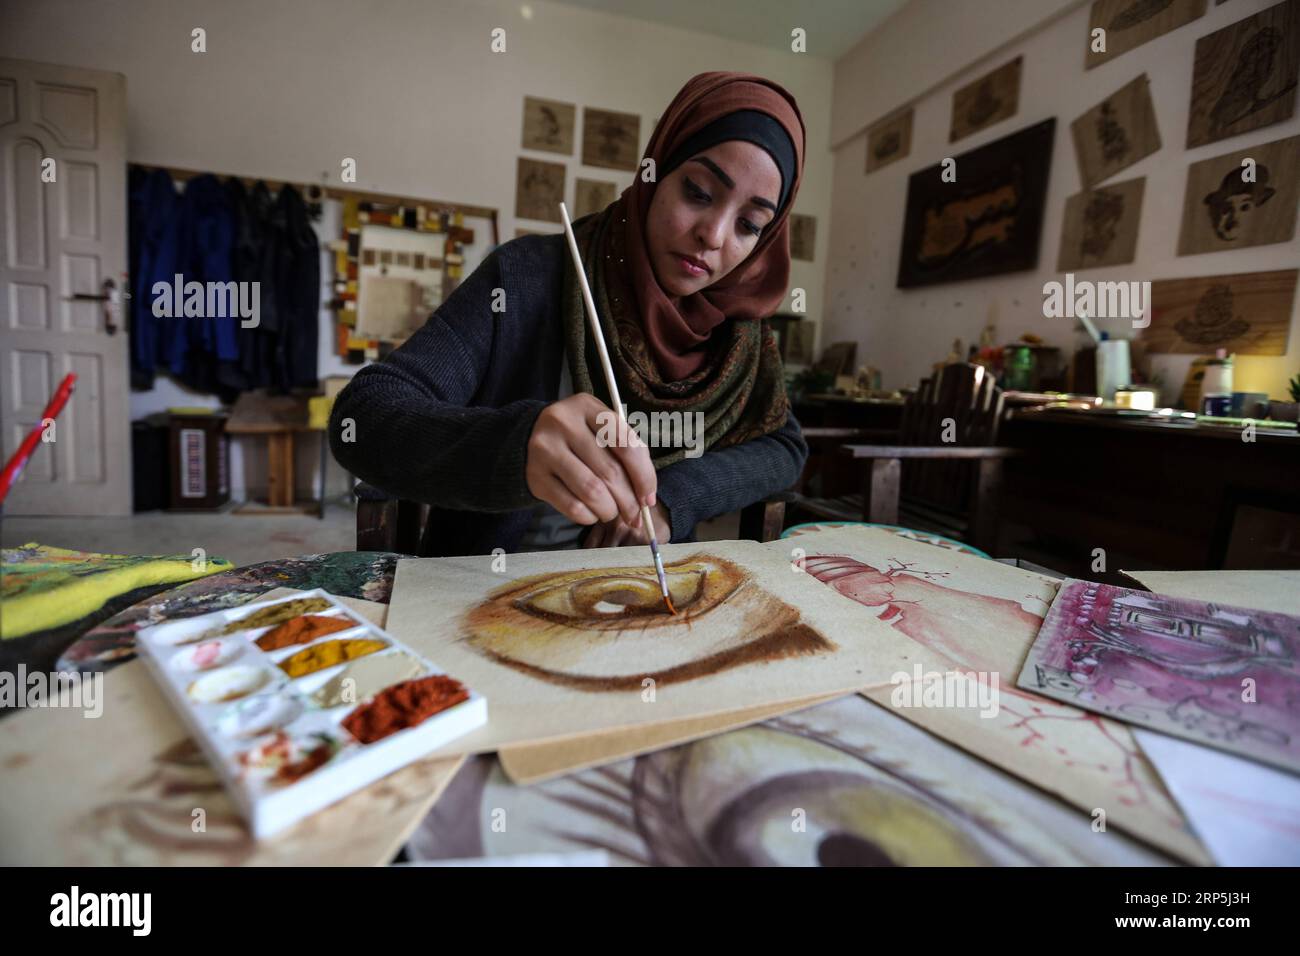 (181215) -- GAZA, Dec. 15, 2018 () -- Palestinian artist Walaa Abu al-Eish uses cooking spices to create an alternative painting in the southern Gaza Strip city of Rafah, on Dec. 9, 2018. A Palestinian woman from the Gaza Strip nontraditionally uses fruit and spices as tools for paintings in a sophisticated and interesting way. The experience of artist Walaa Abu al-Eish, 24, is unprecedented, especially as she developed her skills through online research after graduating from the Faculty of Fine Arts of a local university in Gaza. (/Stringer) MIDEAST-GAZA-FEMALE ARTIST-ALTERNATIVE PAINTING Xin Stock Photo